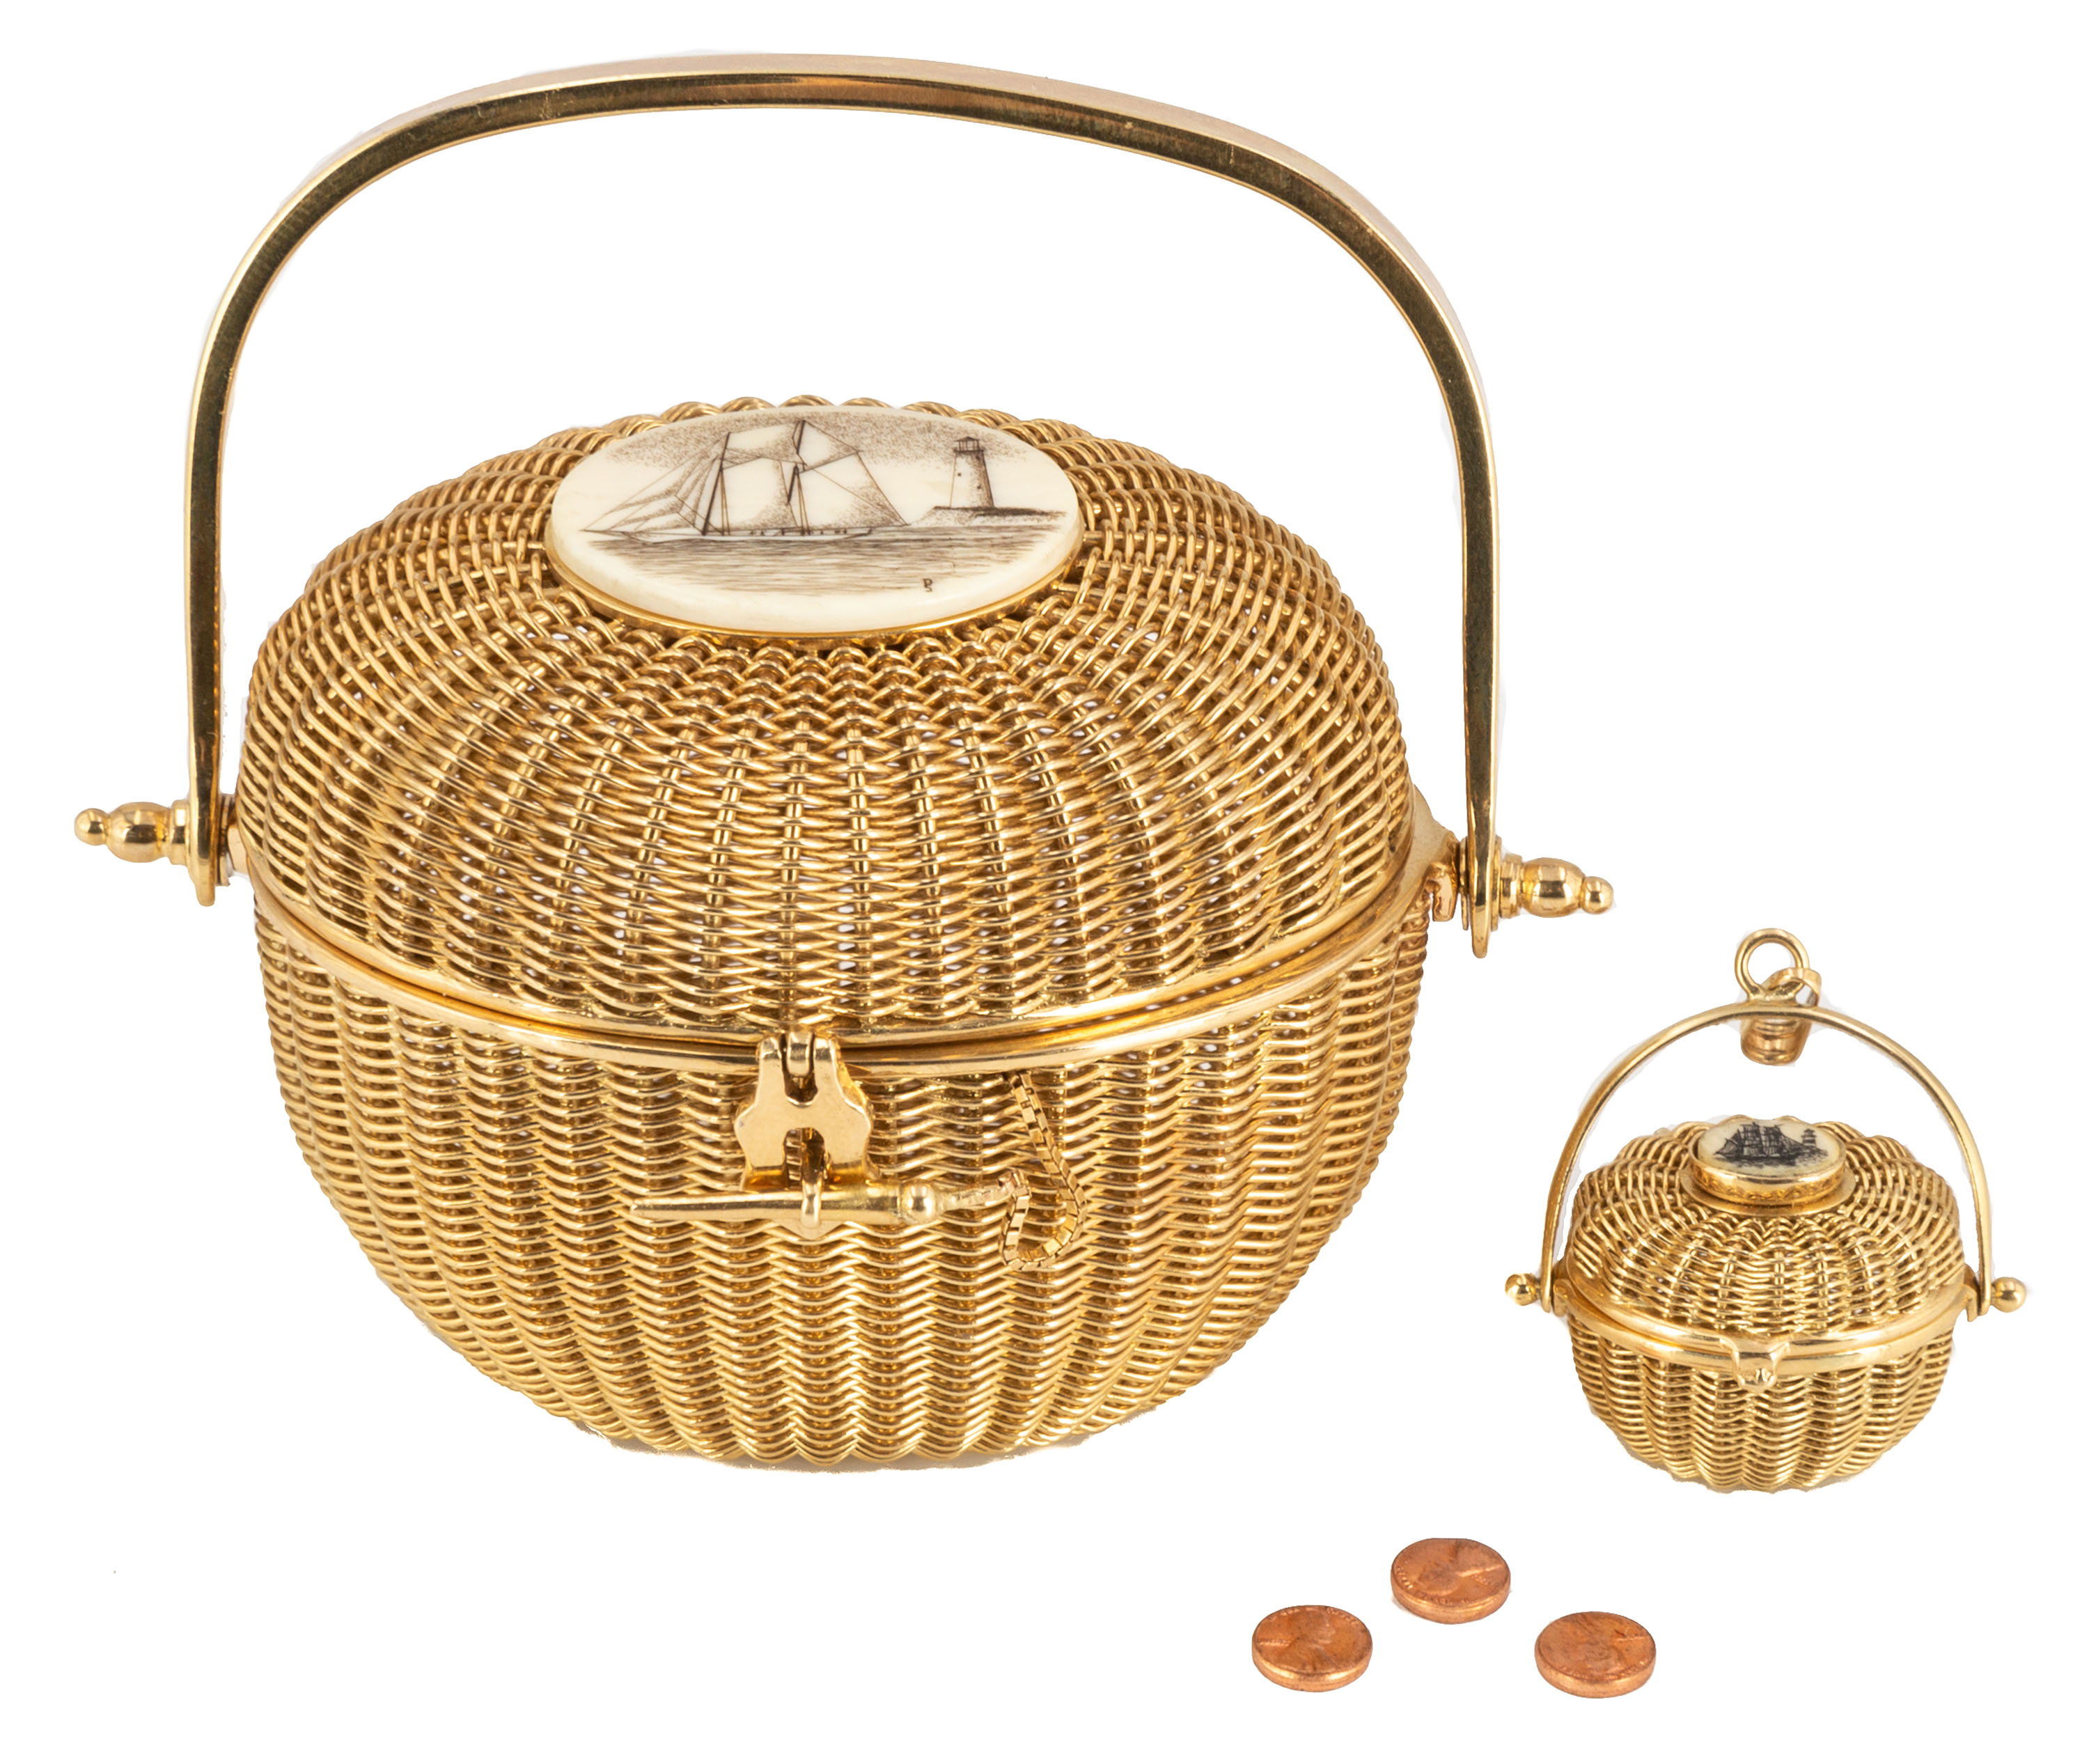 14K GOLD NANTUCKET BASKETS WITH